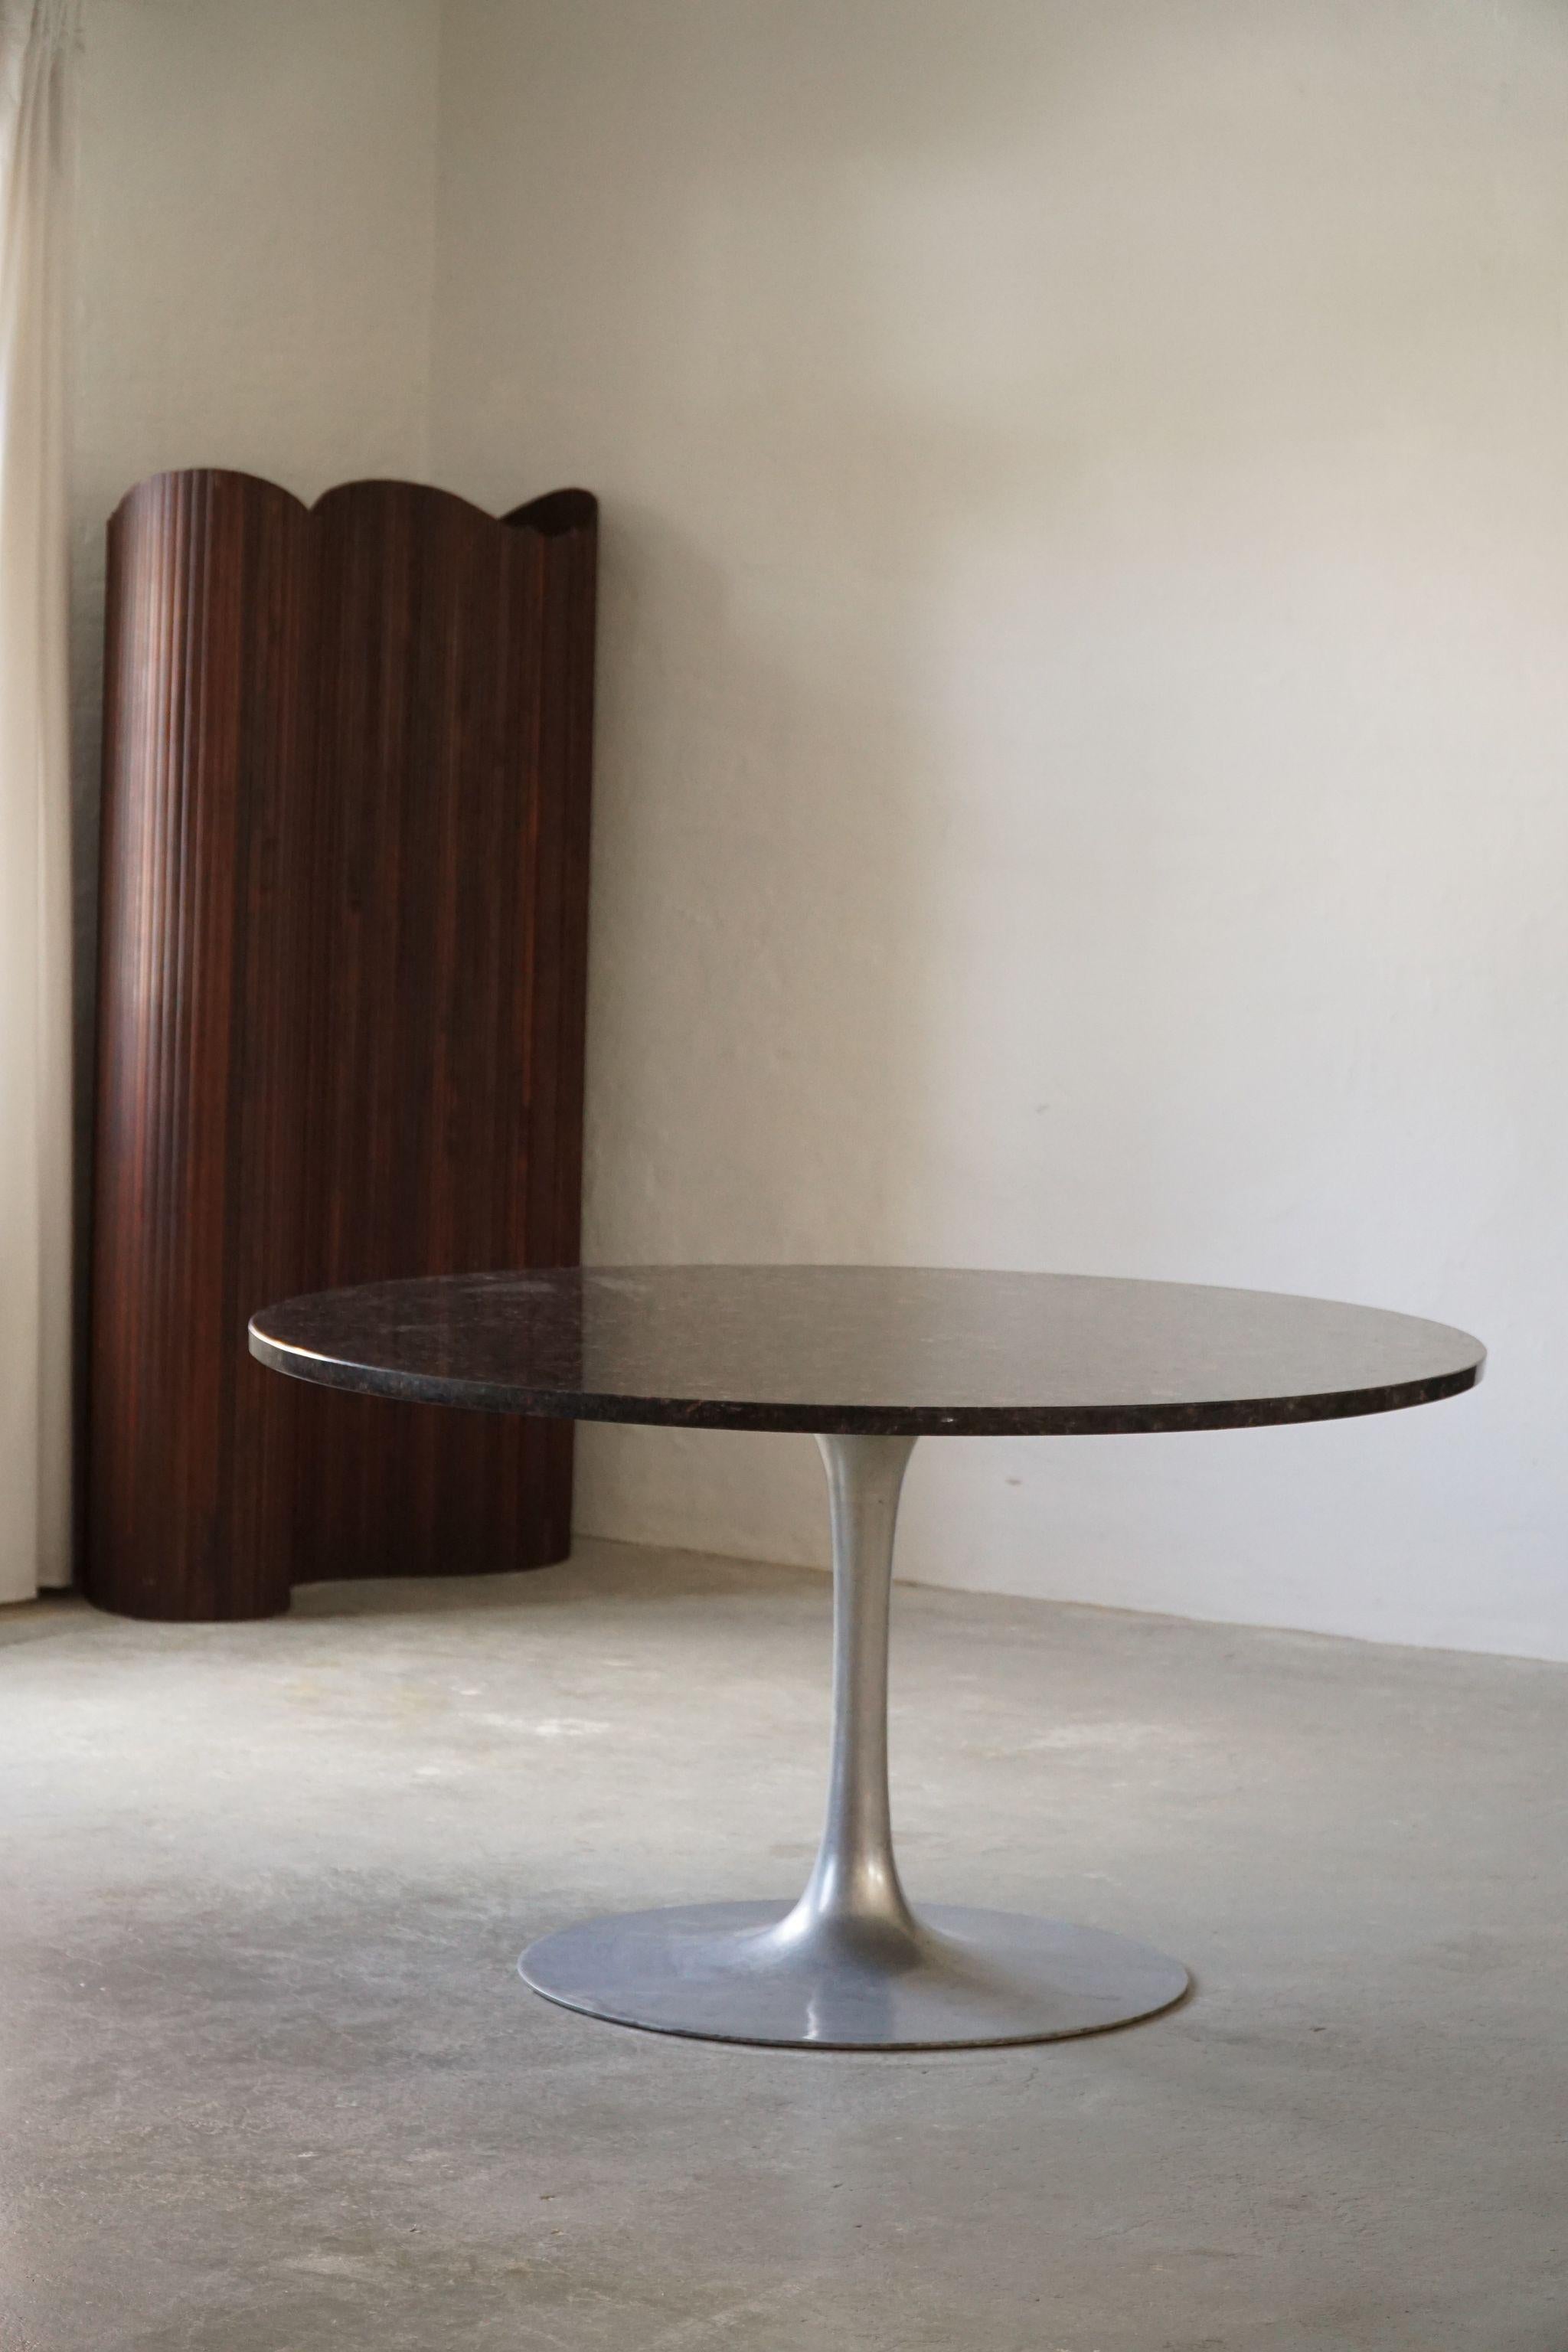 Steel Mid-Century Modern, Round Dining Table in Granite, Tulip Style, Made in 1970s